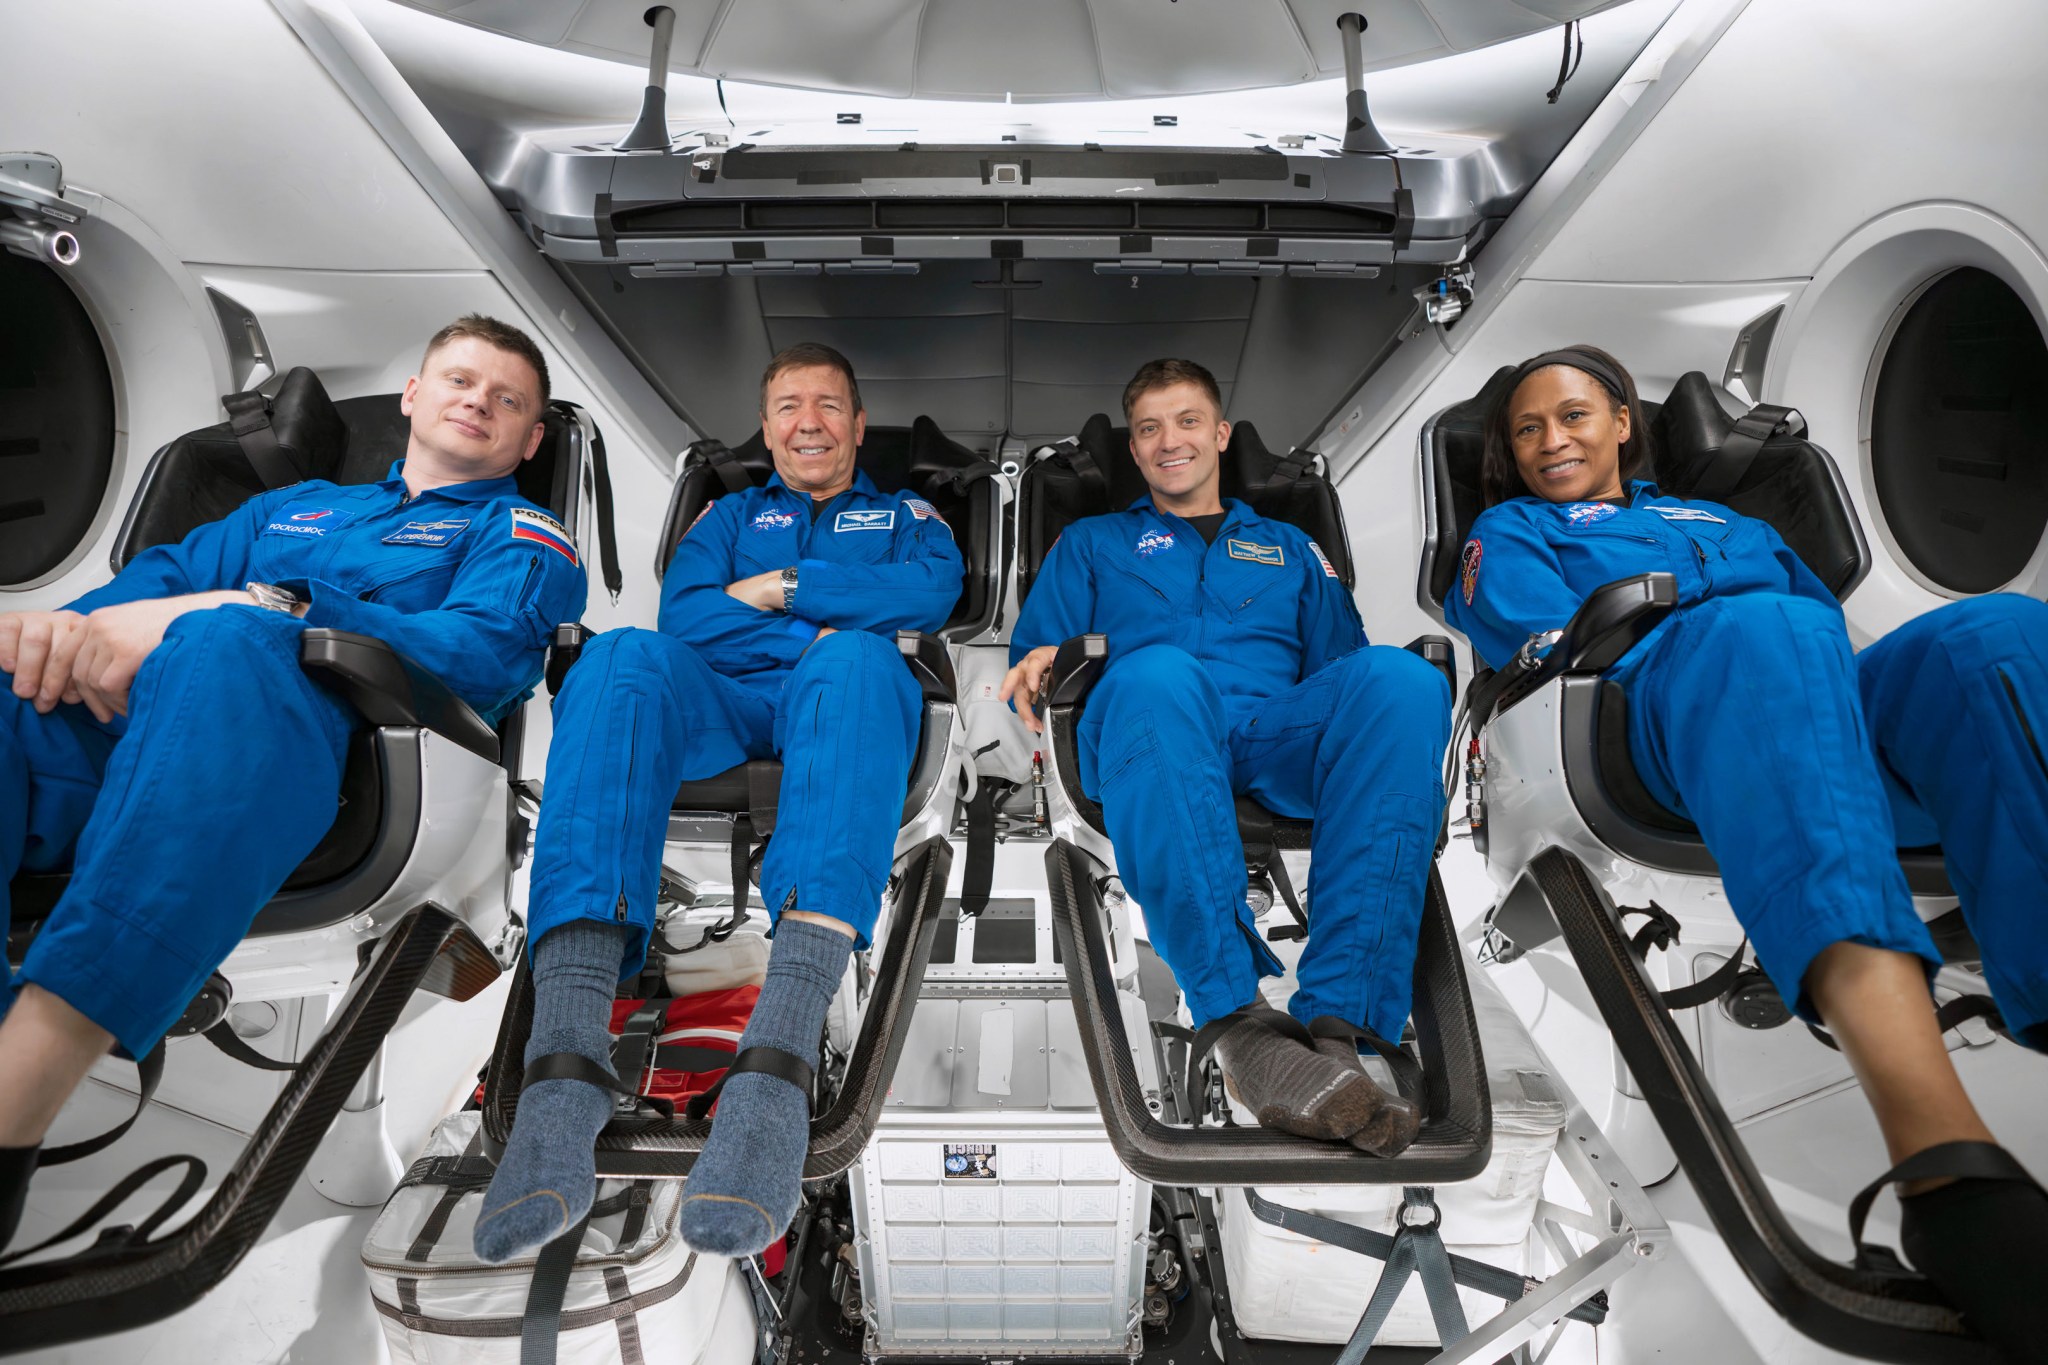 NASA’s SpaceX Crew-8 members, (from left) Alexander Grebenkin from Roscosmos; Michael Barratt, Matthew Dominick, and Jeanette Epps, all NASA astronauts, are pictured training inside the SpaceX Dragon spacecraft in Hawthorne, California.